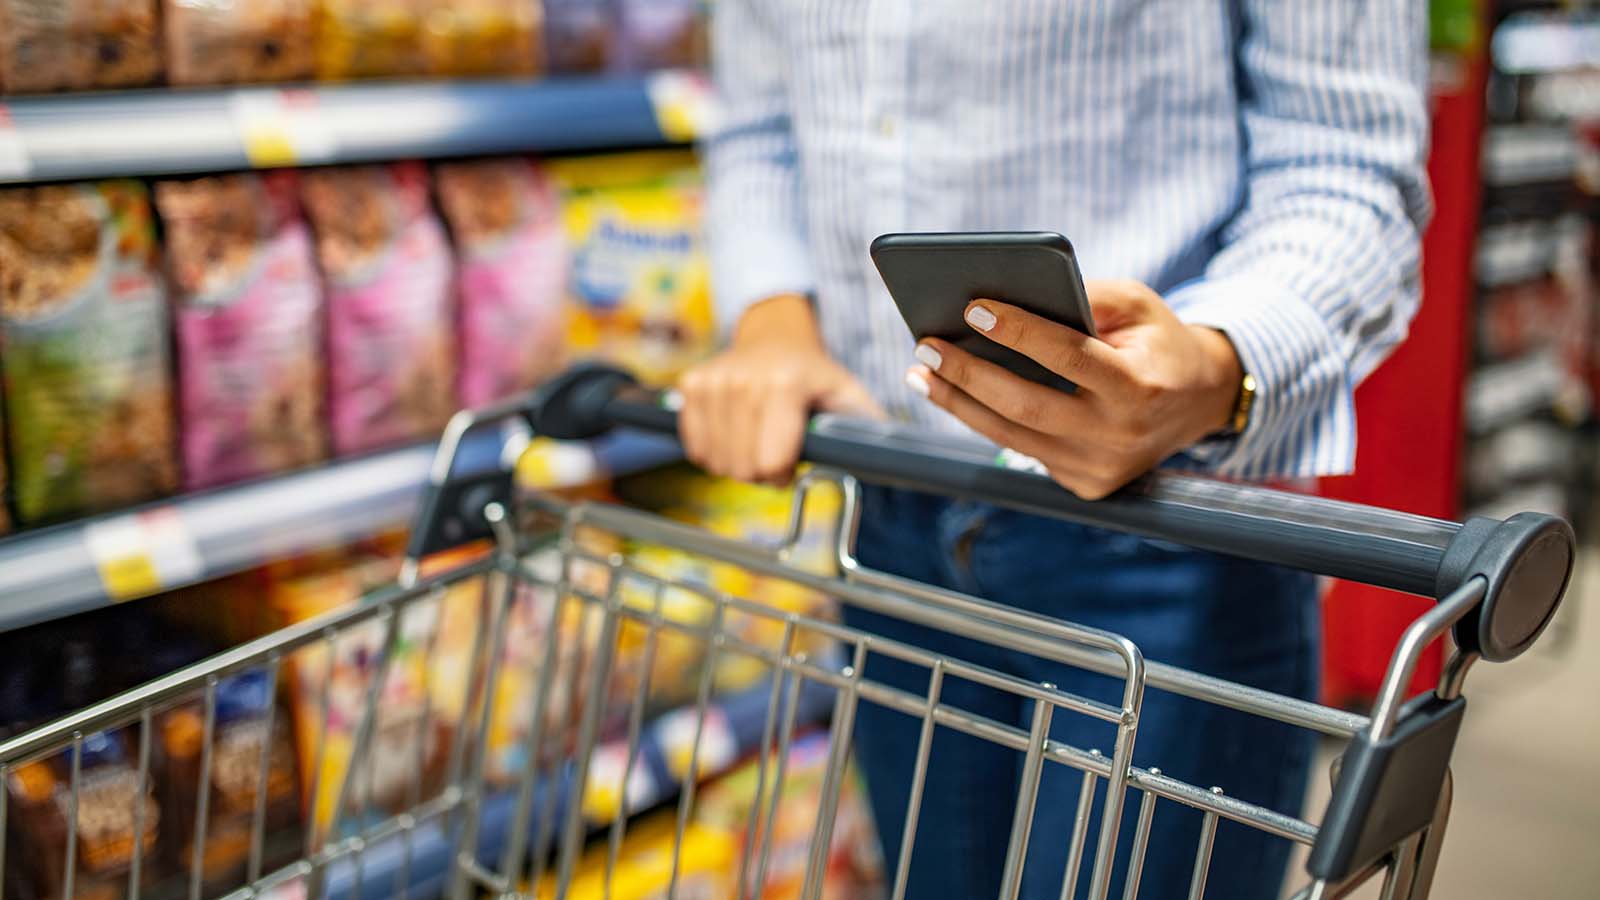 Woman with smartphone in store grocery shopping